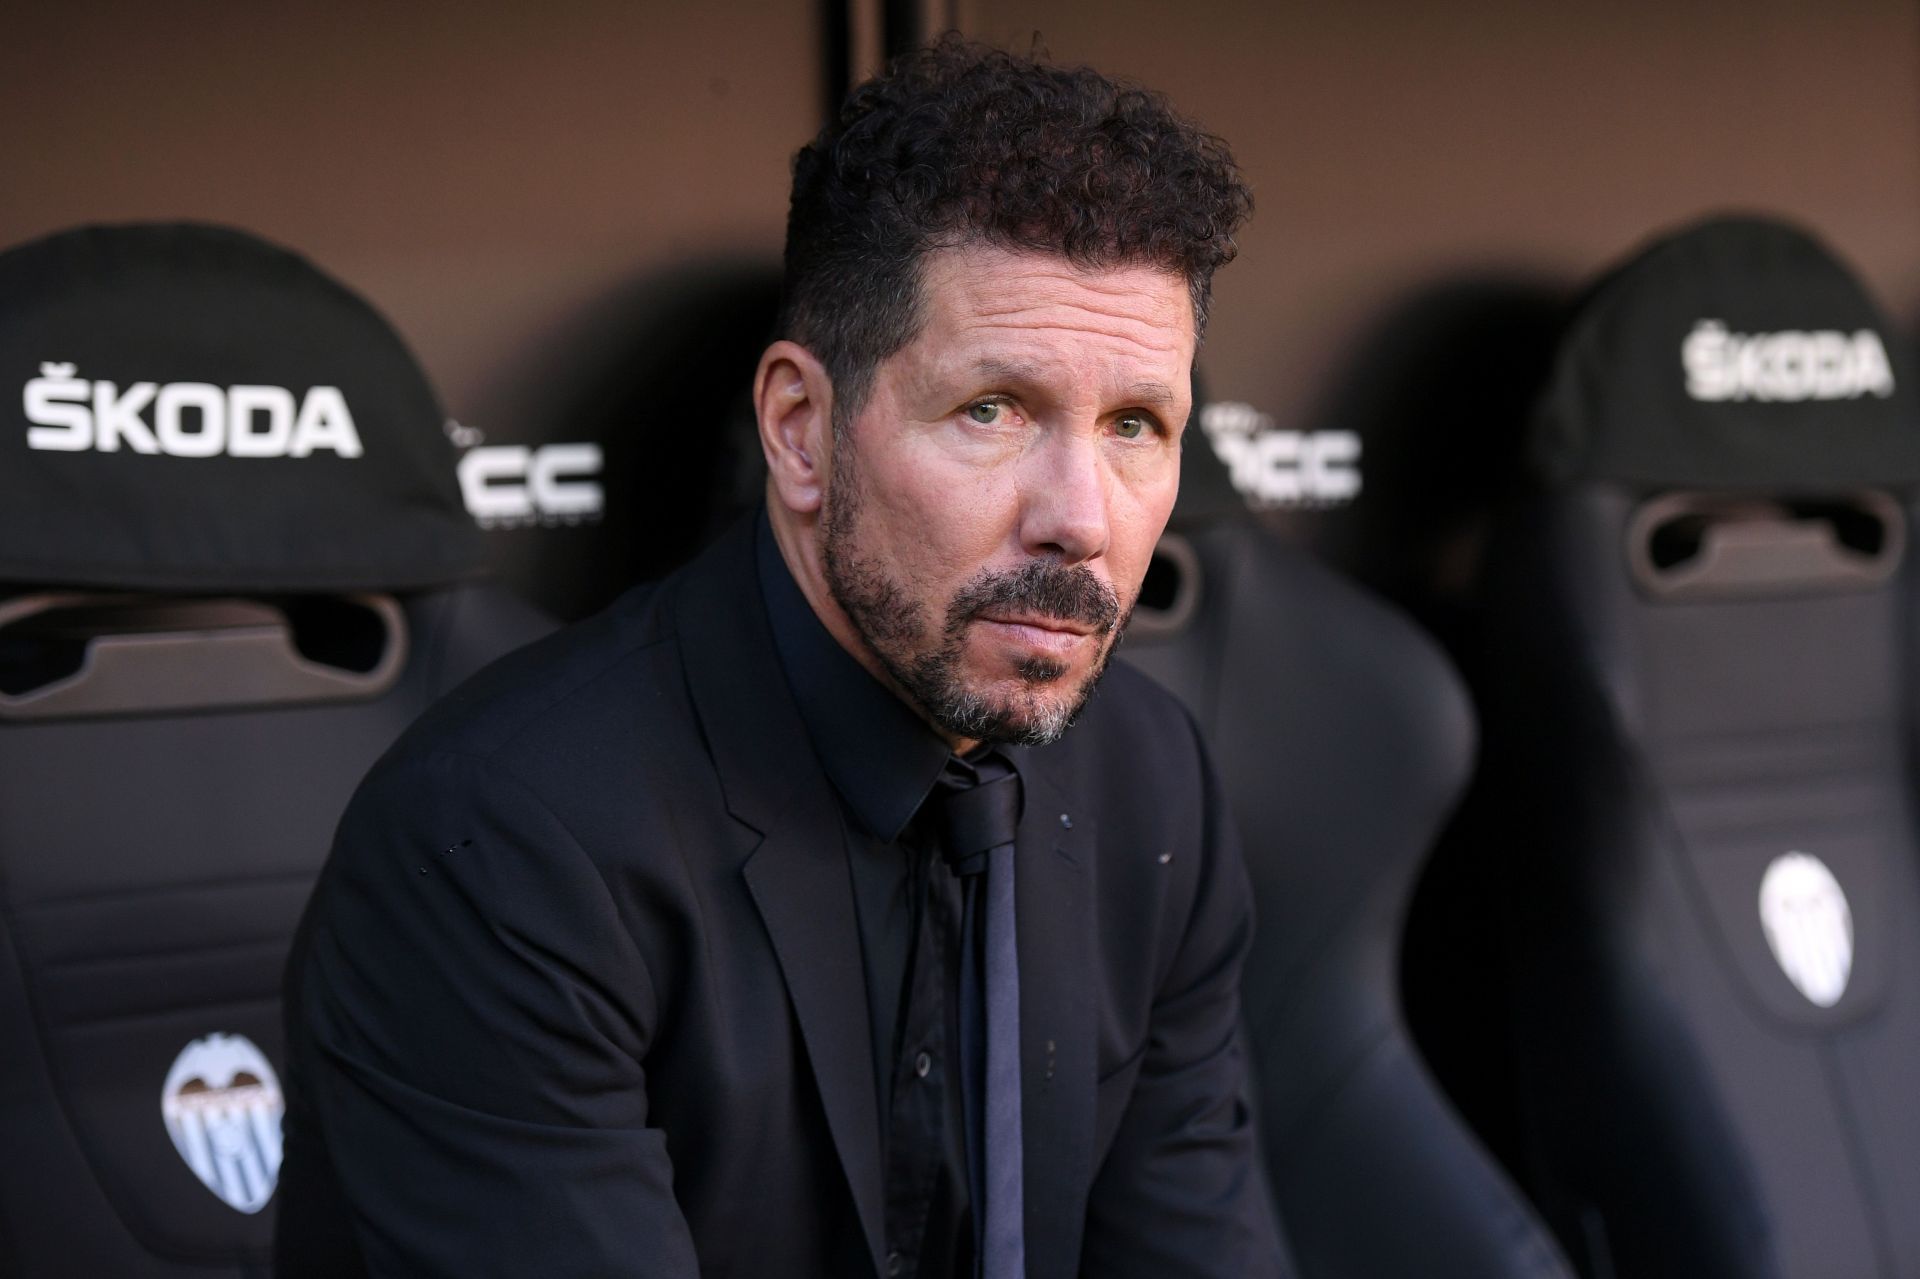 Atletico Madrid have disappointed in their title defence this season.